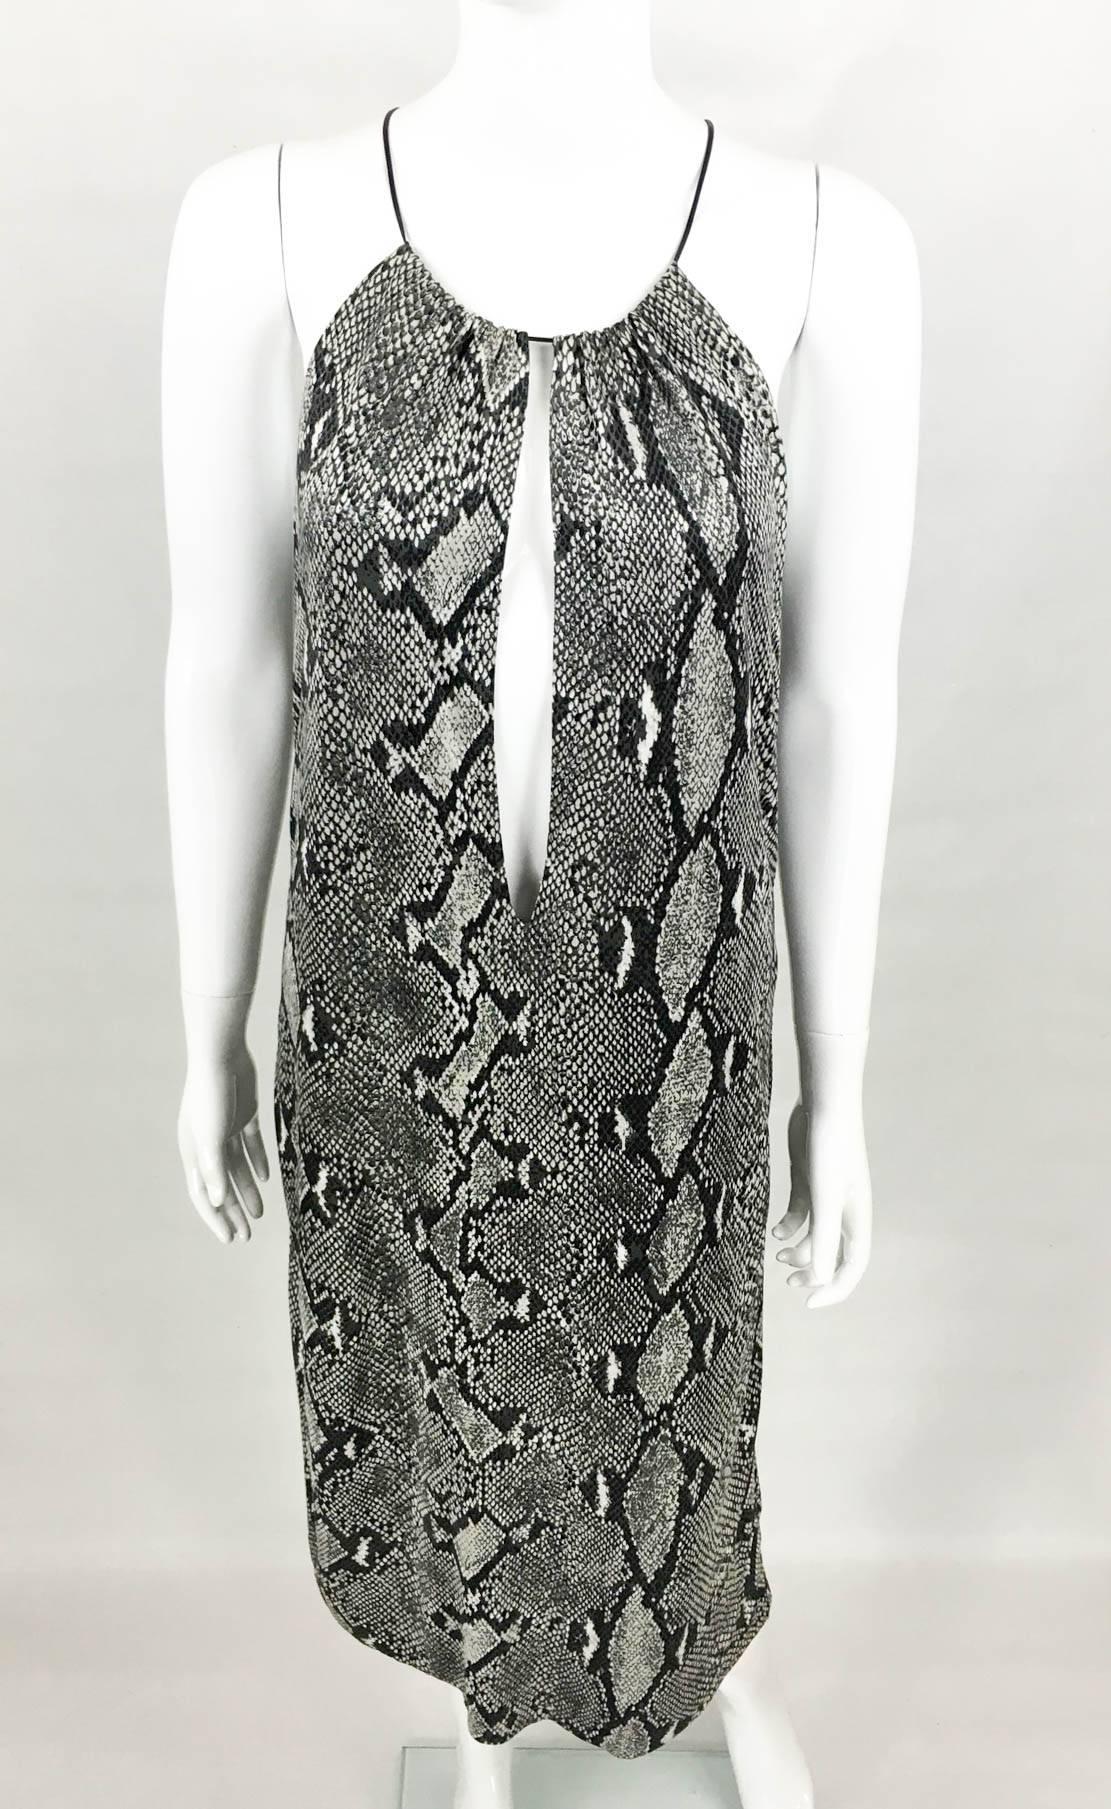 Gucci by Tom Ford Runway Python Print Dress - Circa 2000 In Excellent Condition For Sale In London, Chelsea